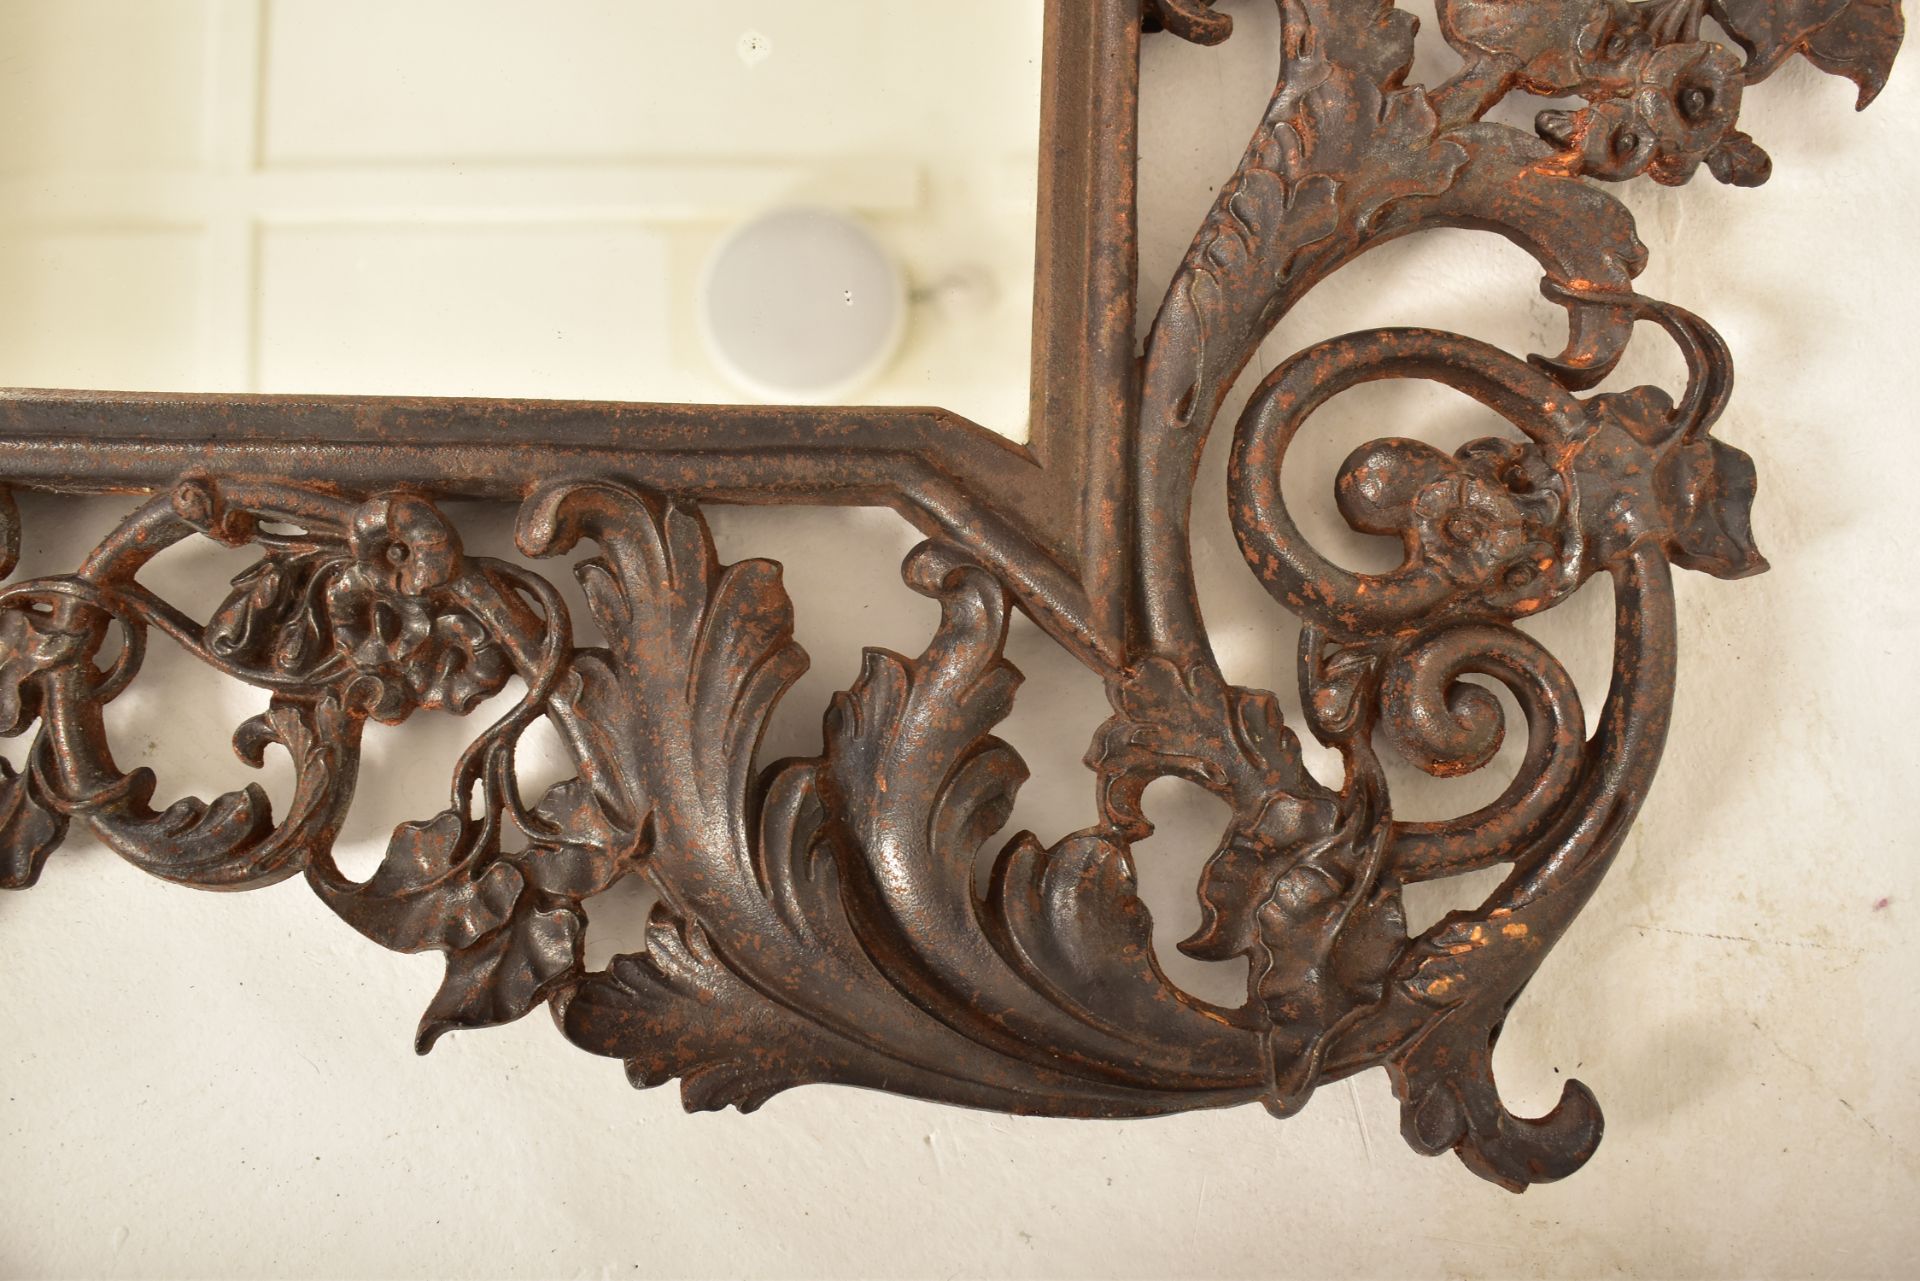 VICTORIAN ROCOCO STYLE CAST IRON WALL MIRROR - Image 2 of 4